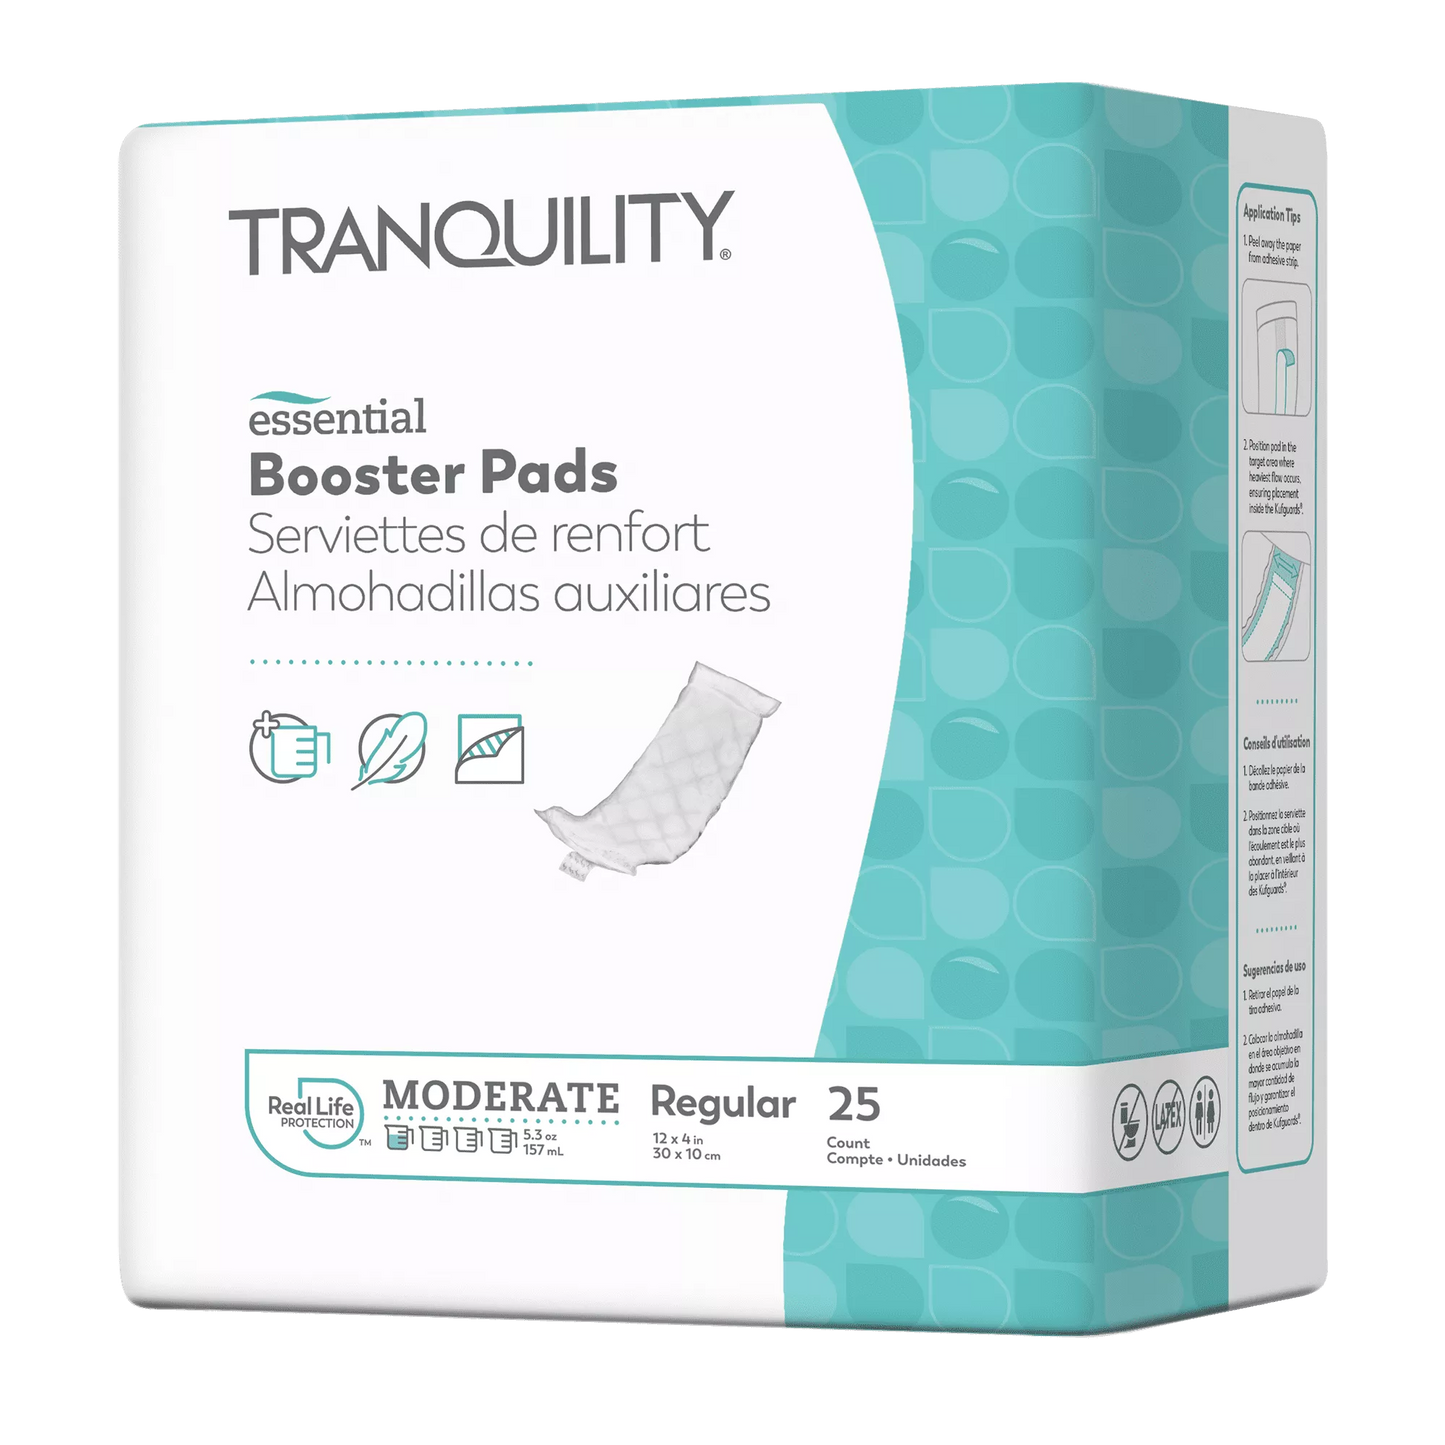 Tranquility® Essential Booster Pads – Regular, Moderate Absorbency